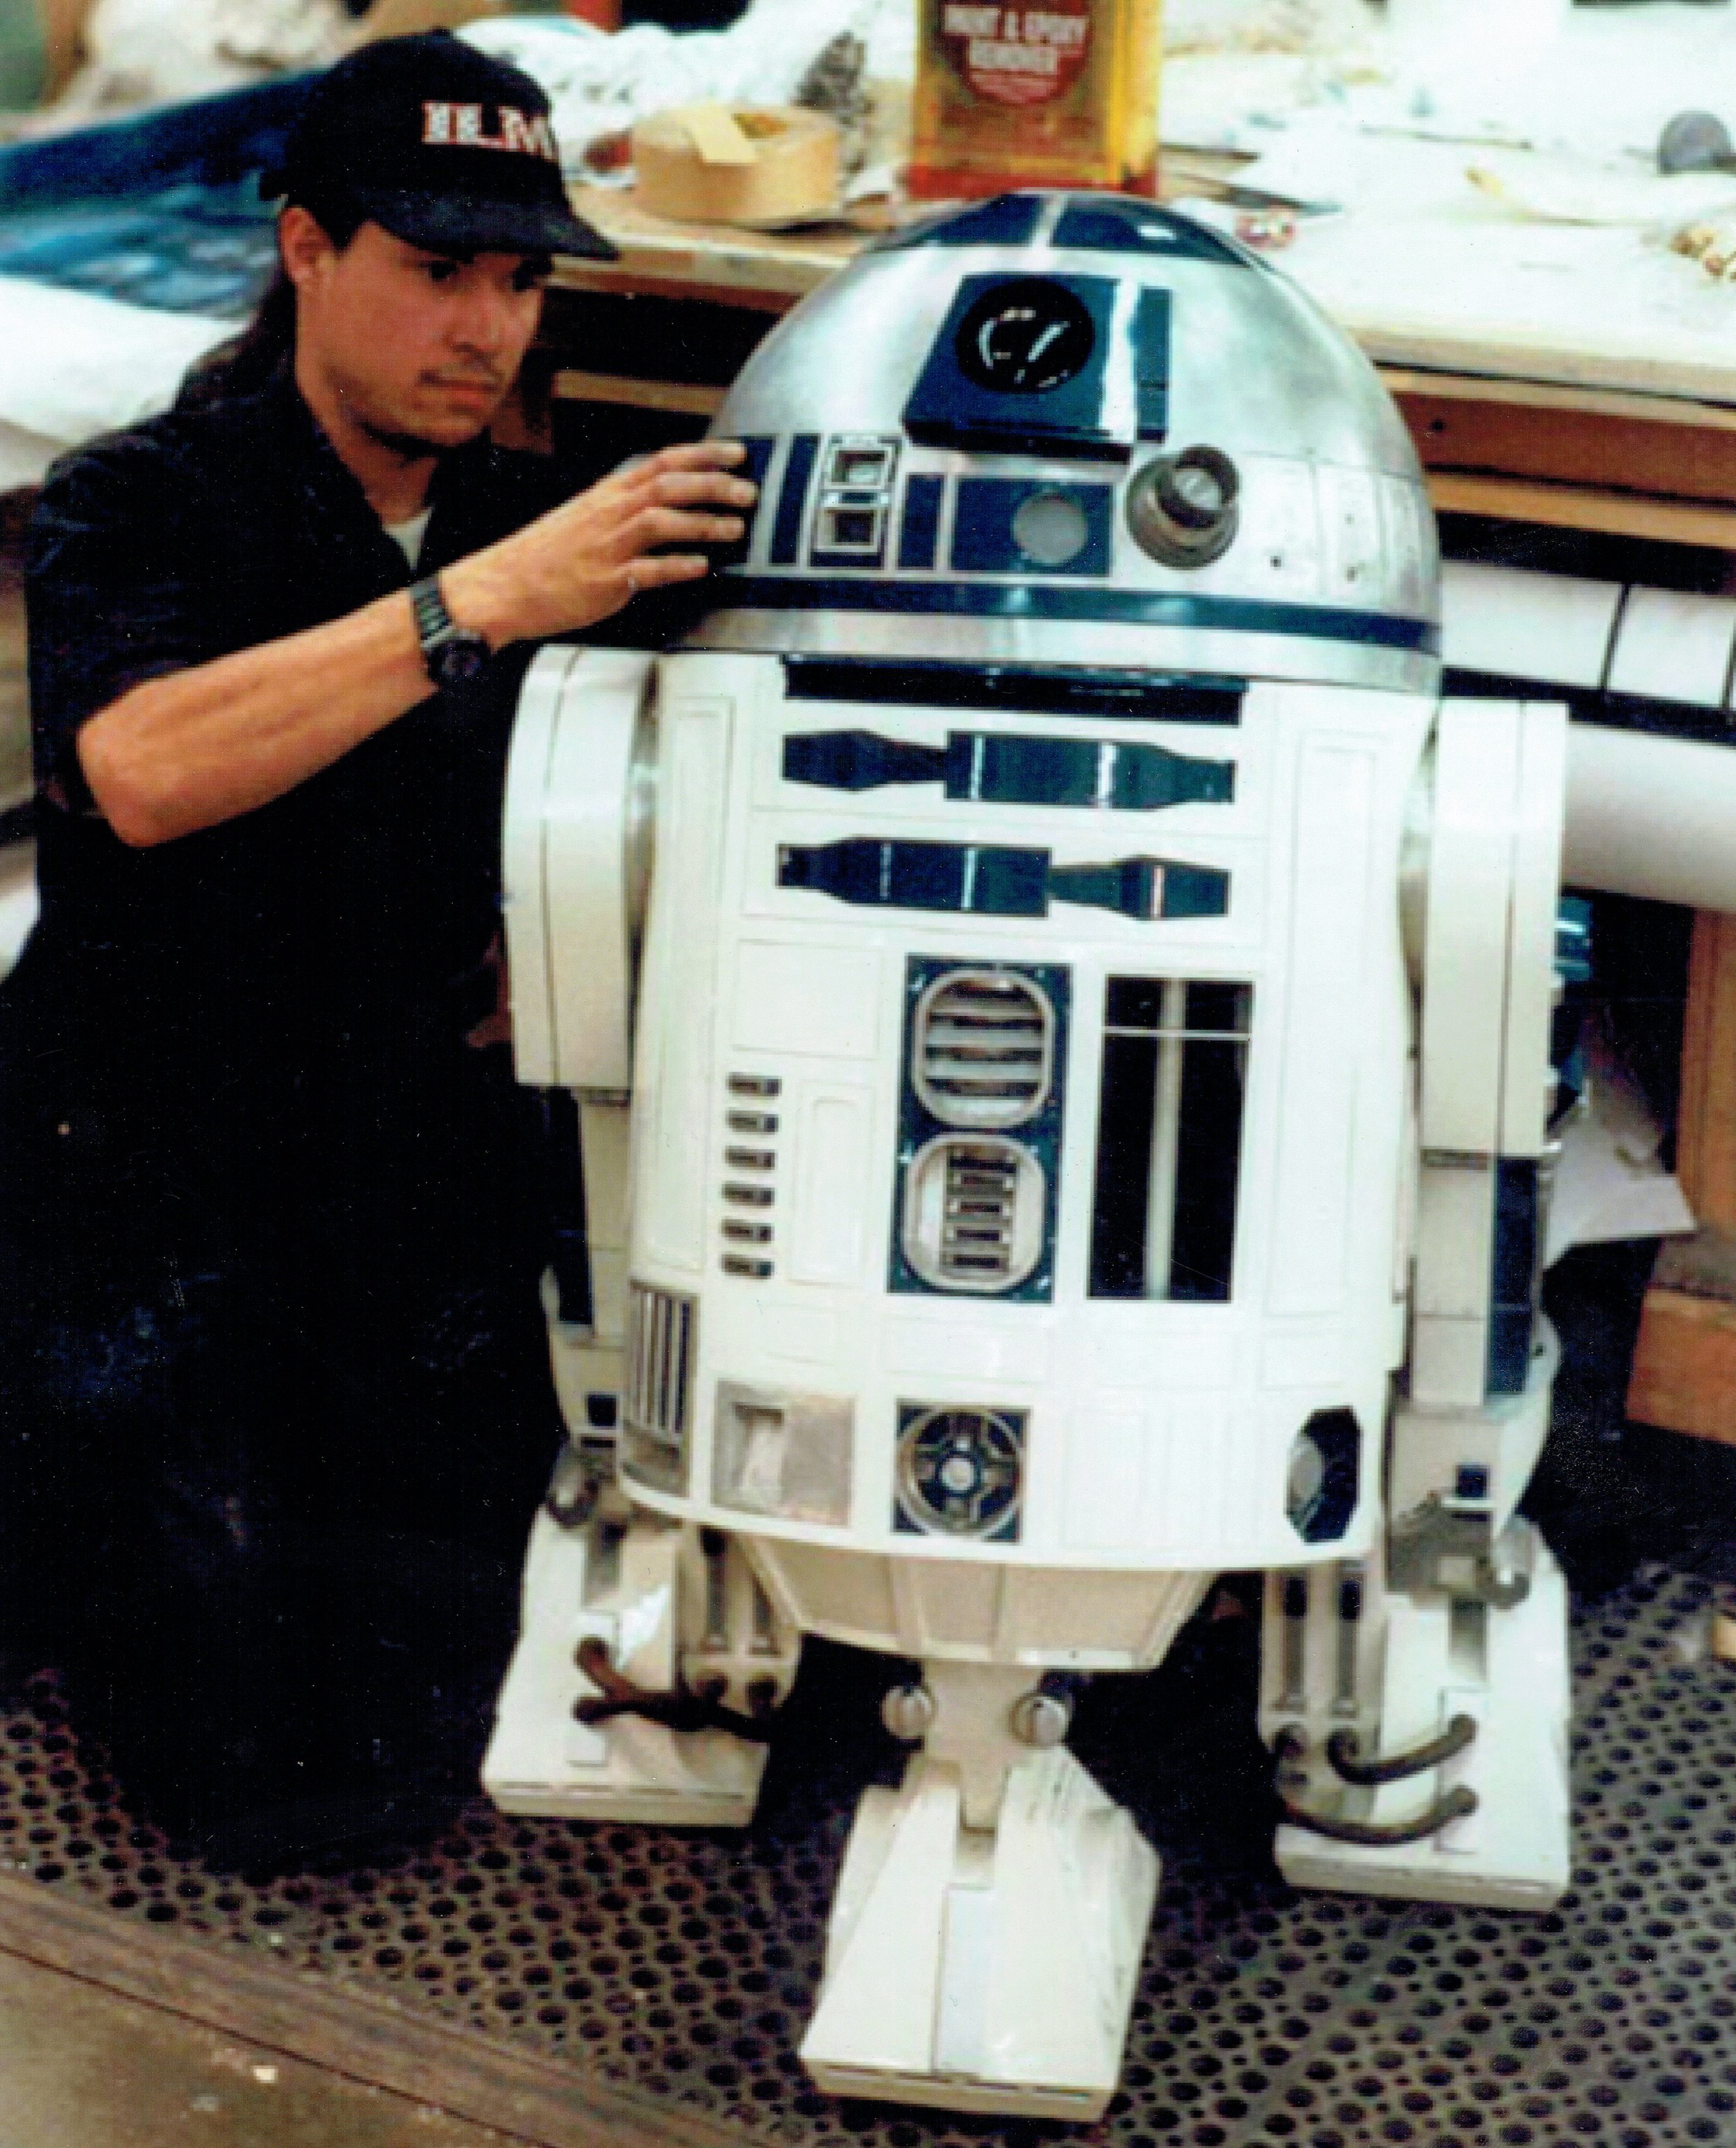  Working on R2 